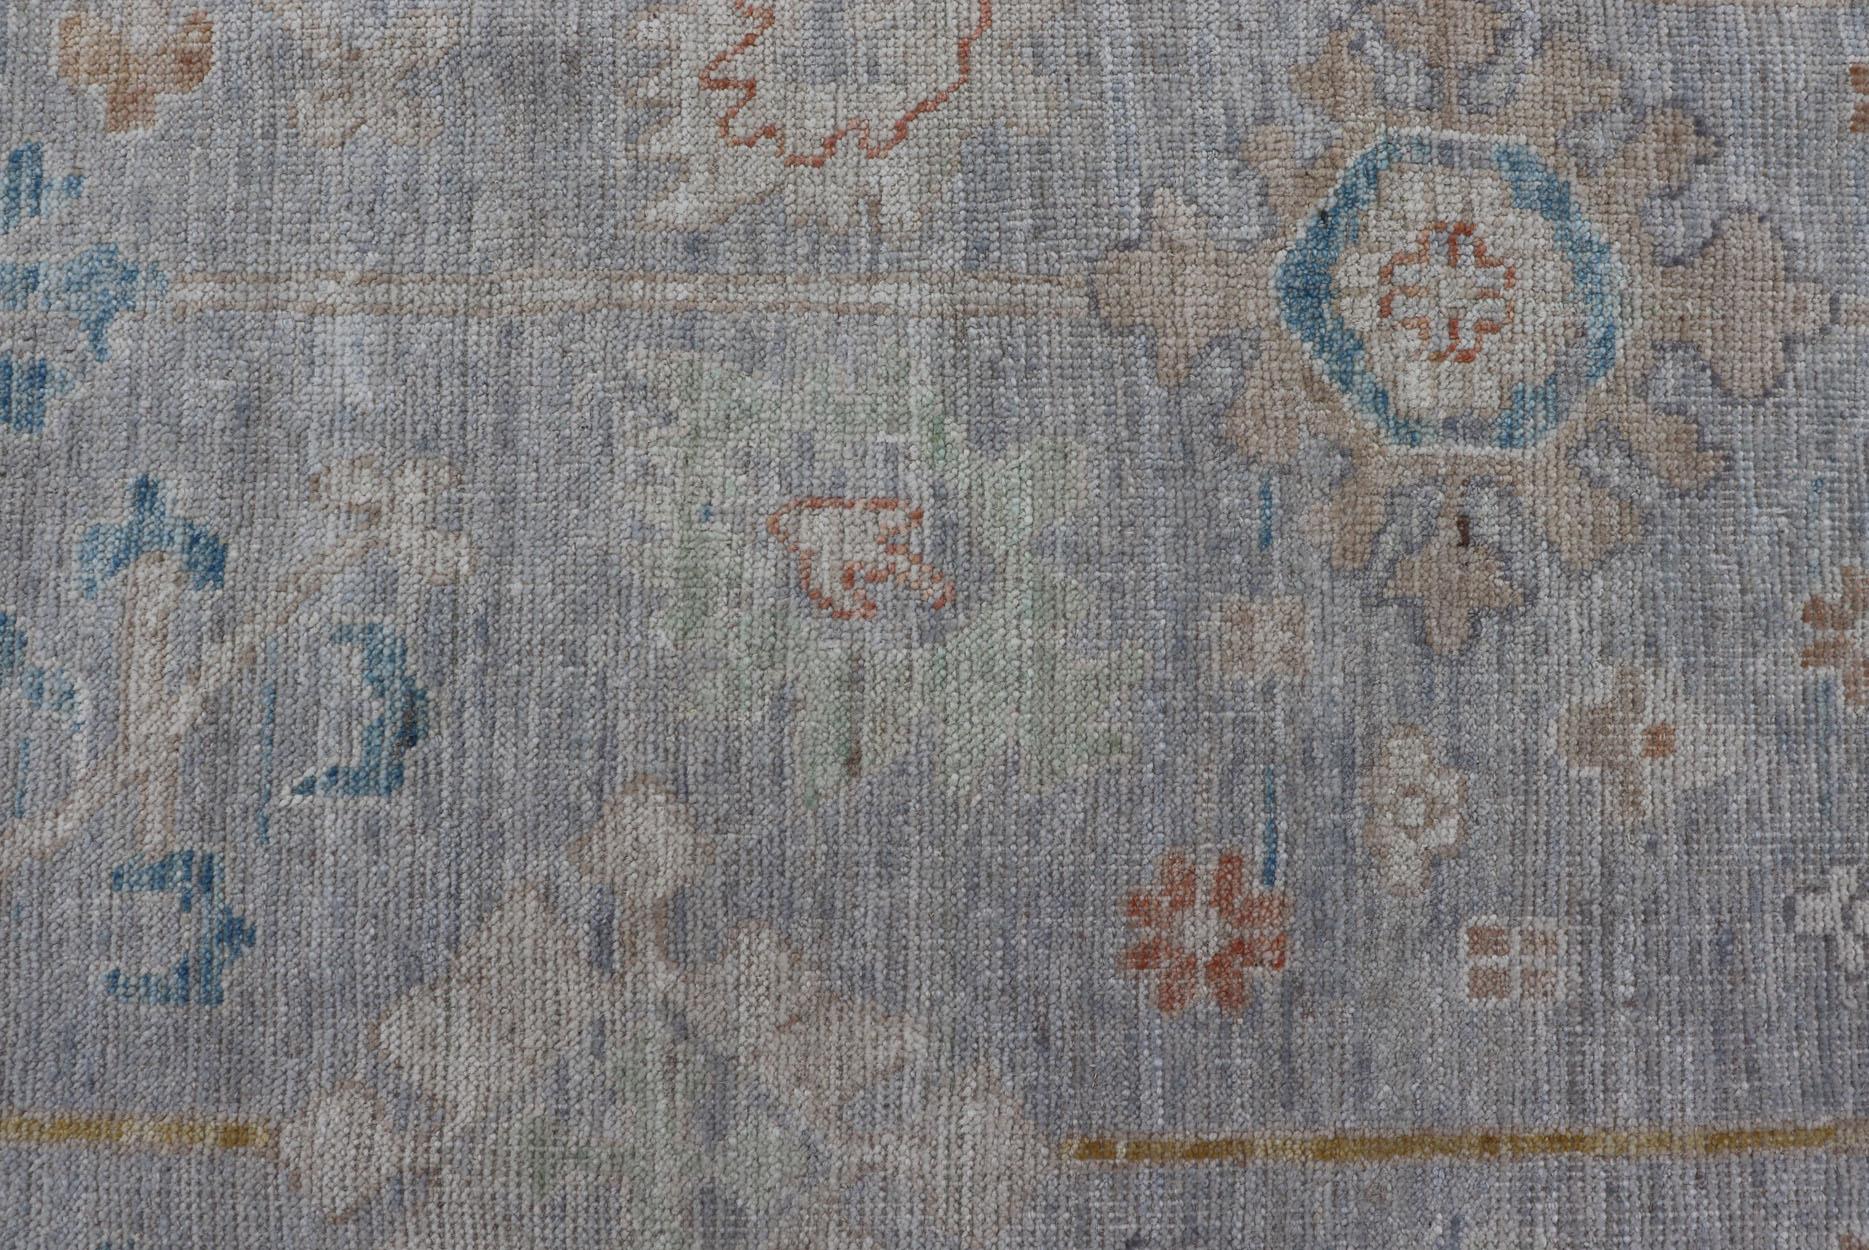 Afghan Modern Oushak Rug Hand Knotted on a Light Gray Field and Rusty Orange